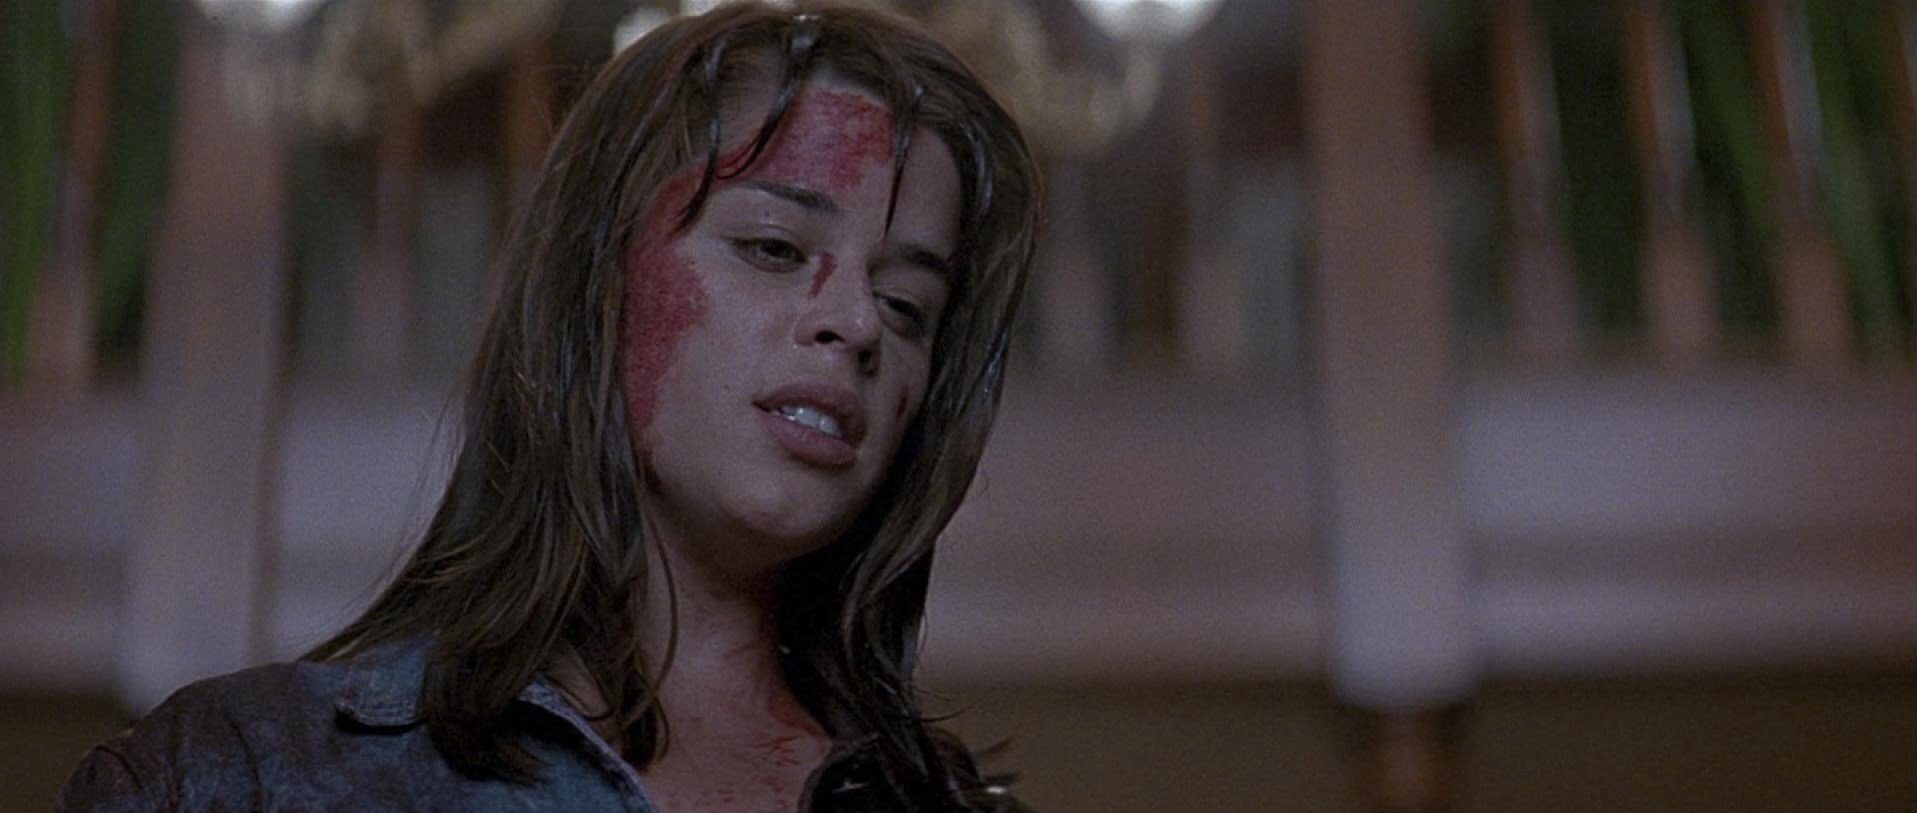 Sidney Prescott (Neve Campbell) with blood on her face after a rough night in 'Scream'